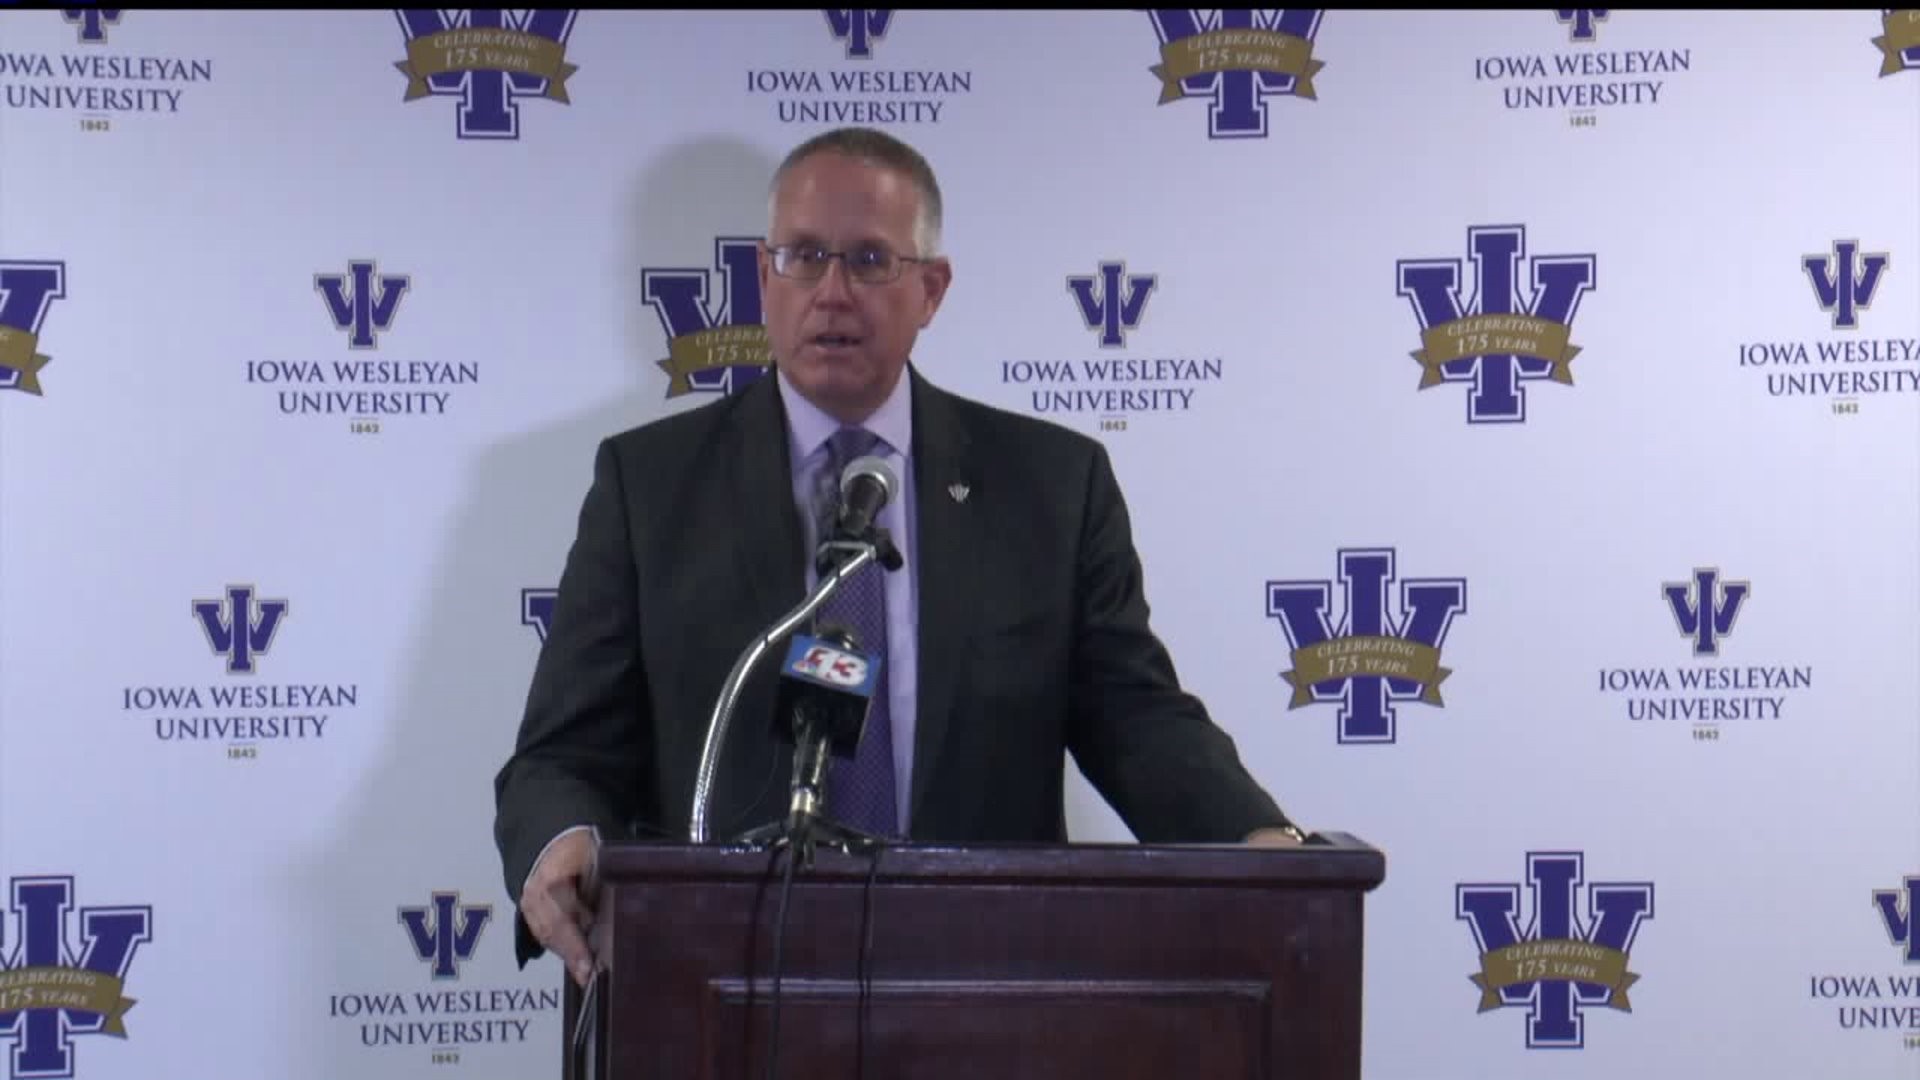 "We are moving forward in a very vigorous way" - Iowa Wesleyan to stay open